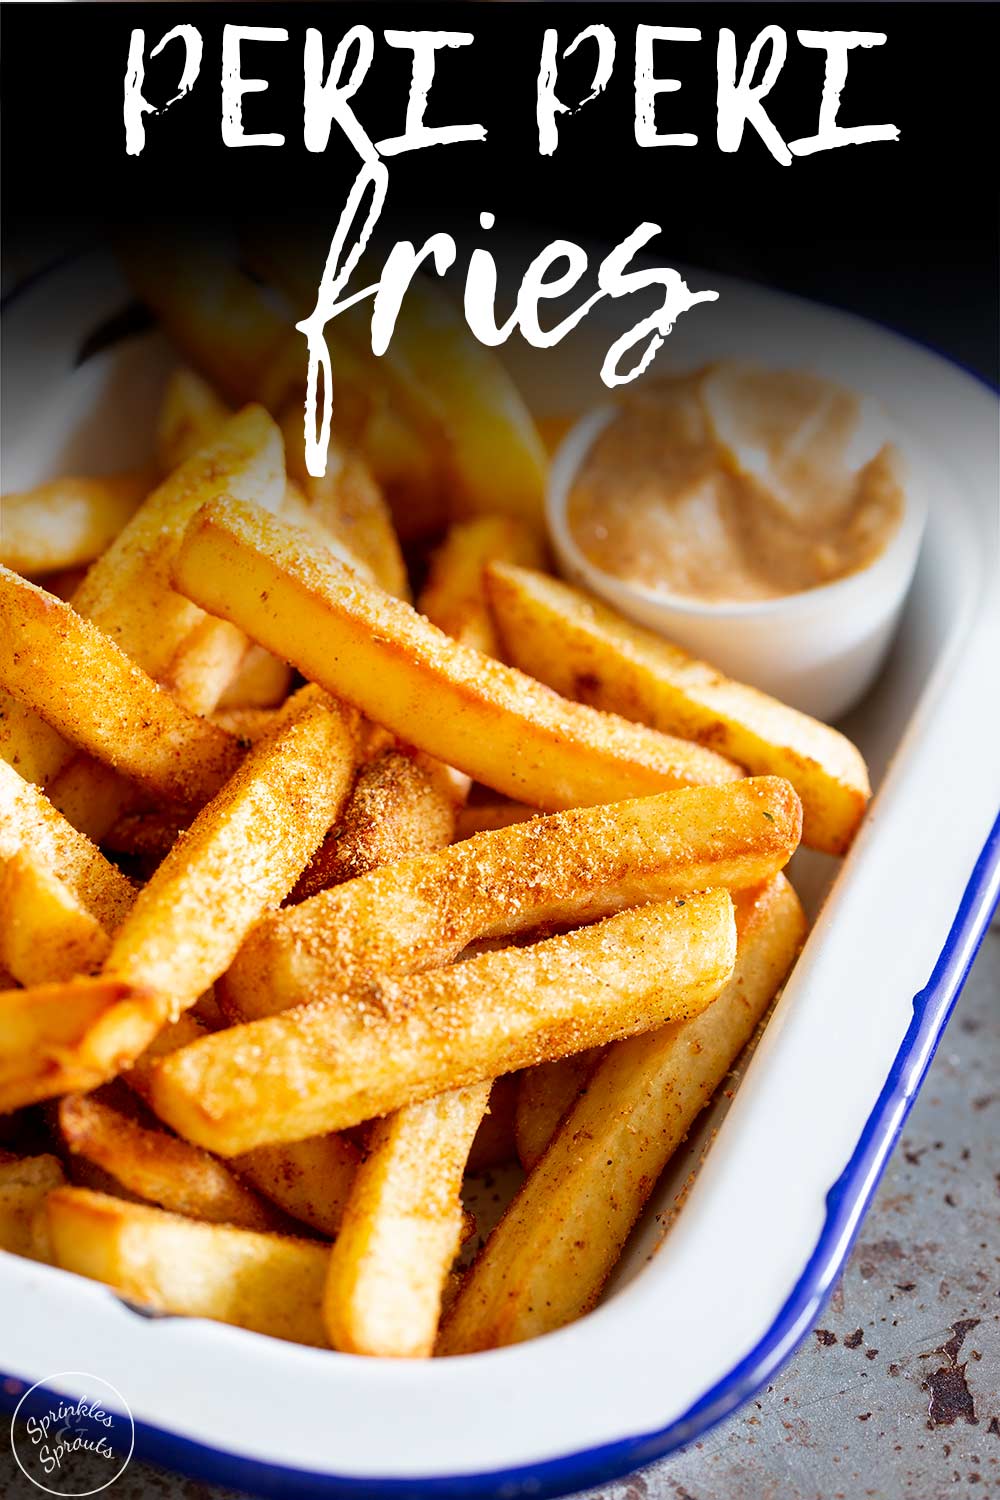 PINTEREST IMAGE - Peri peri fries with text overlay